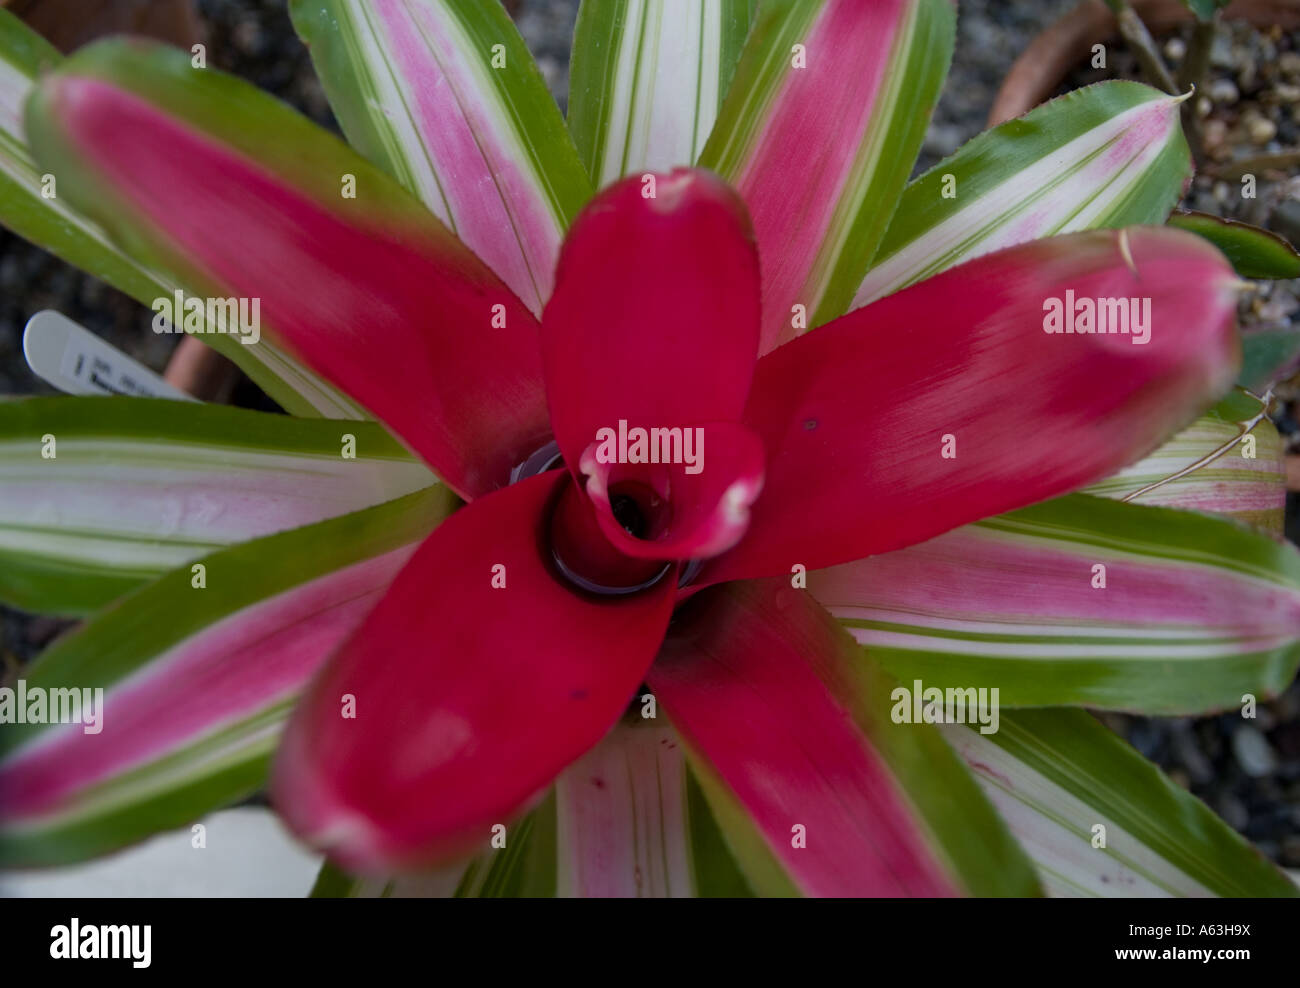 Aechmea fulgens tropical plant with green leaves and pink core flower. Stock Photo